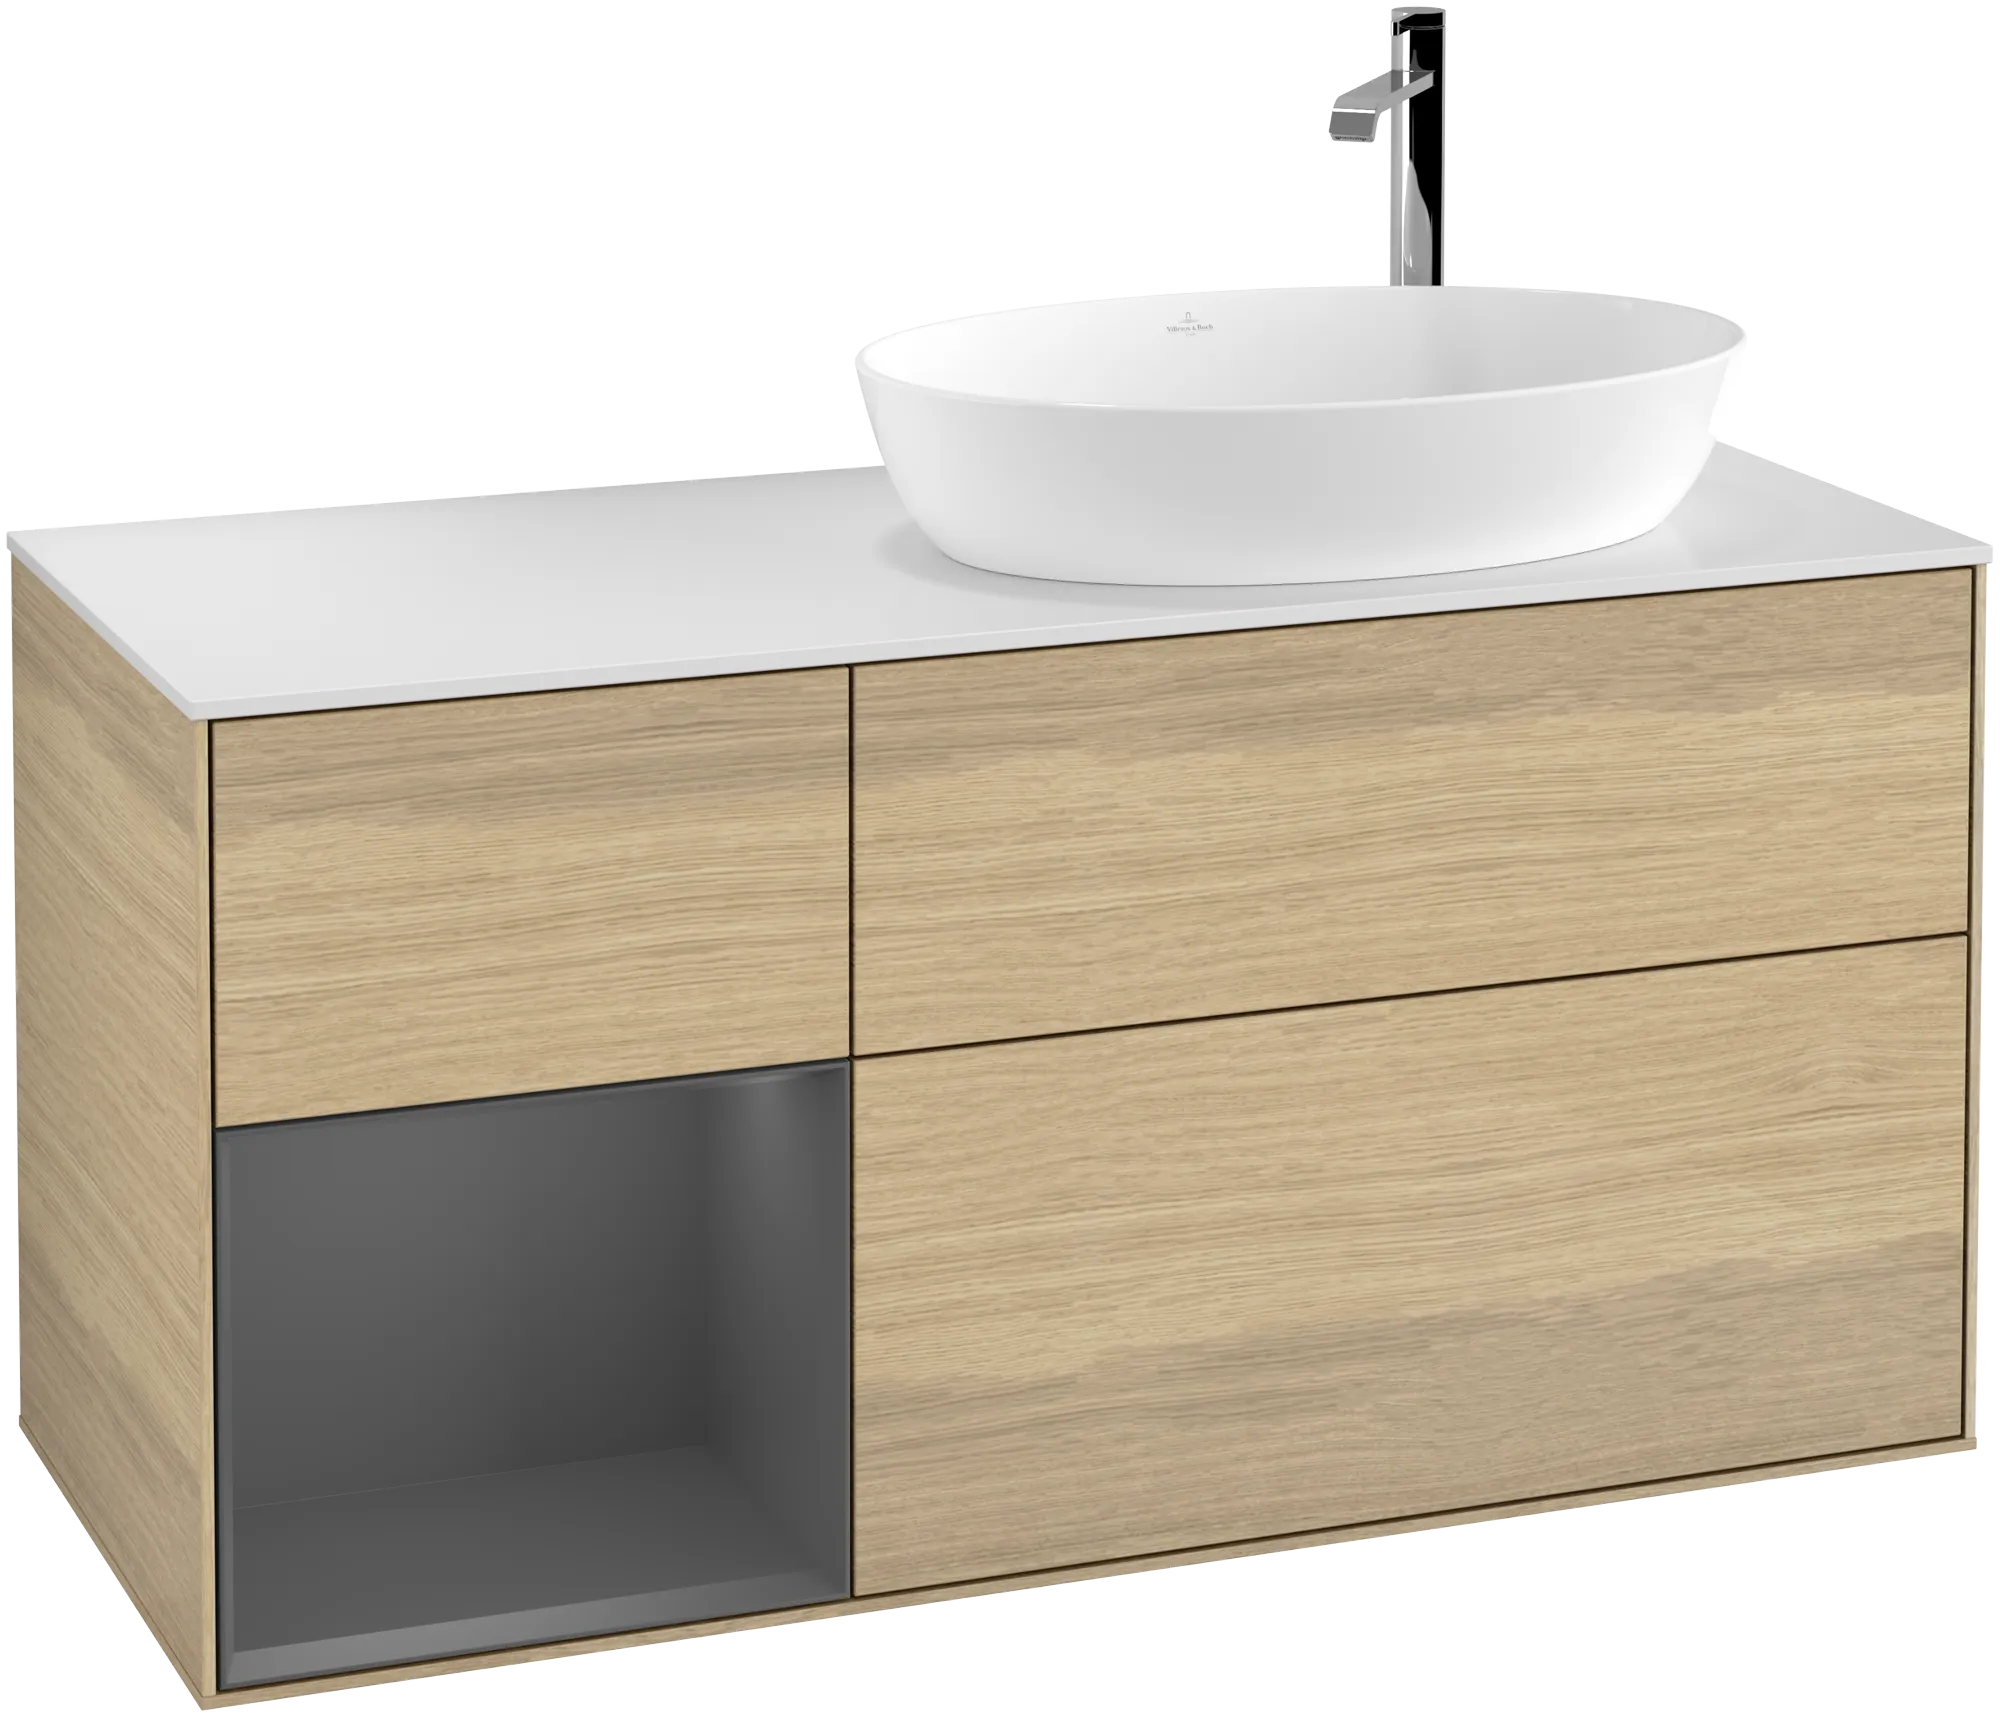 VILLEROY BOCH Finion Vanity unit, with lighting, 3 pull-out compartments, 1200 x 603 x 501 mm, Oak Veneer / Anthracite Matt Lacquer / Glass White Matt #G921GKPC resmi